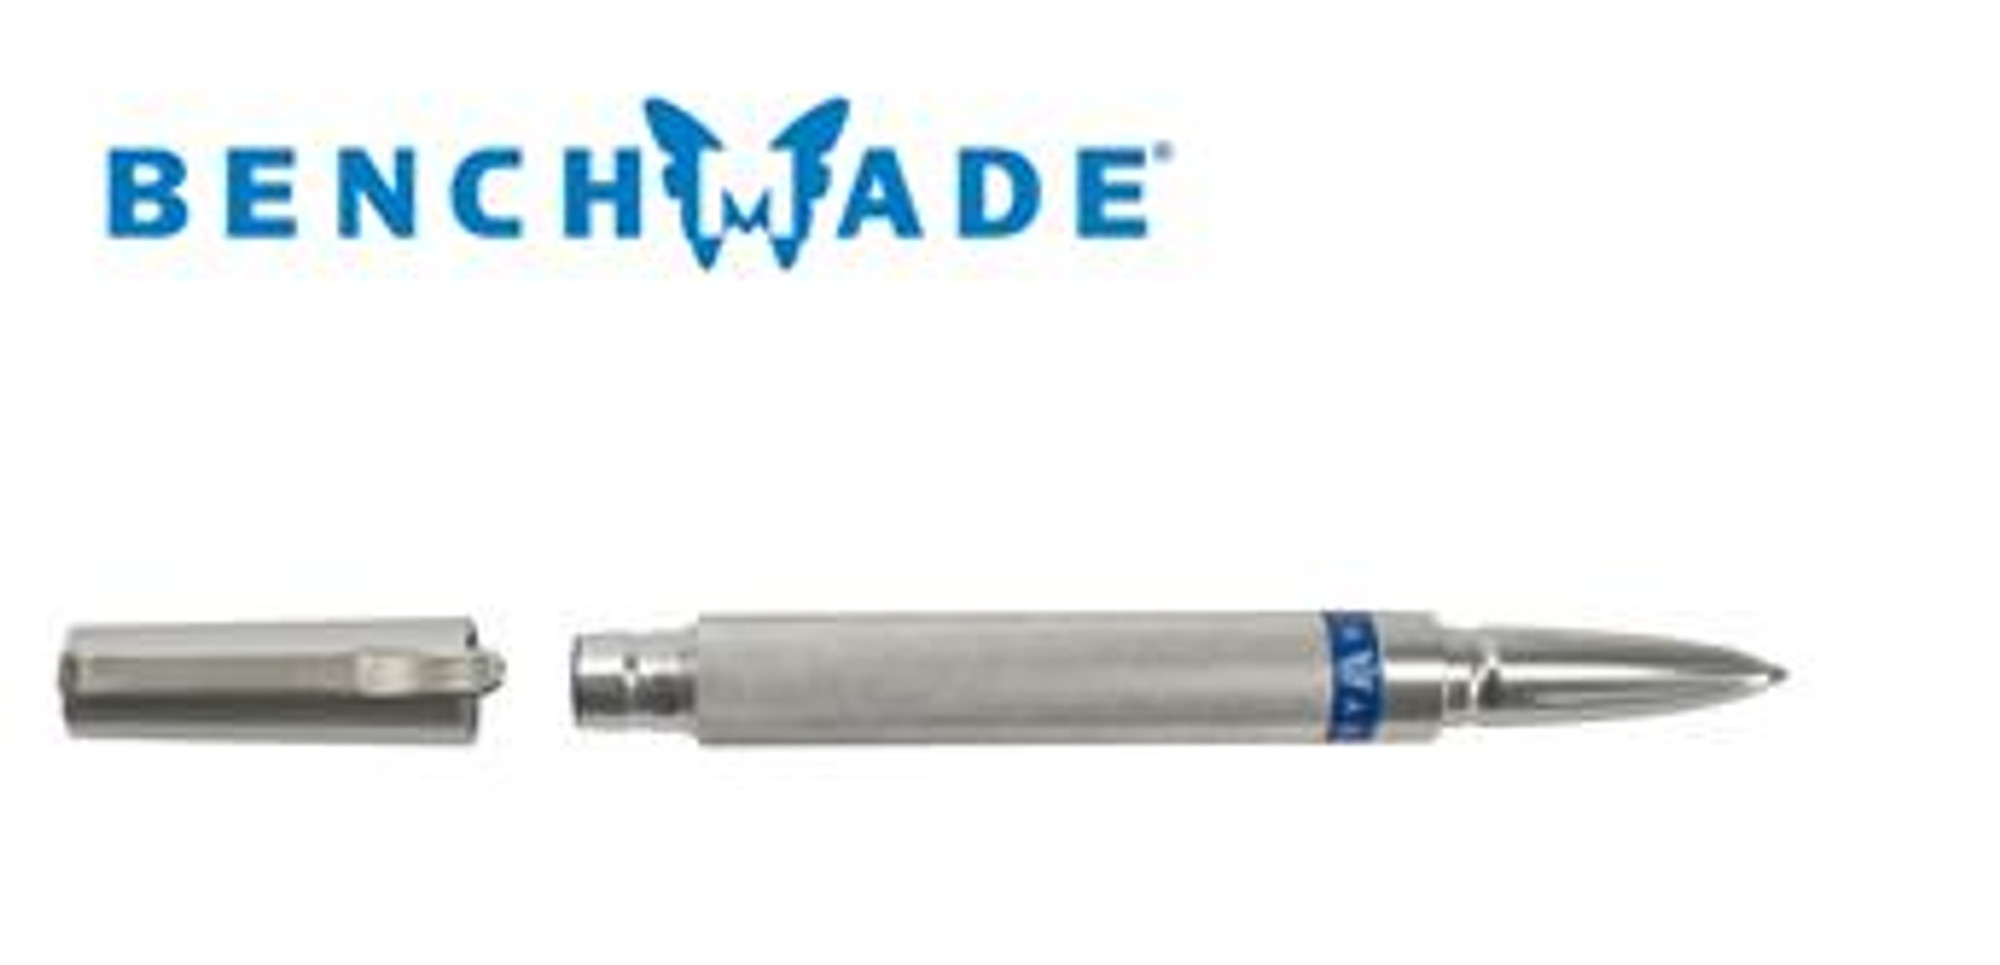 Benchmade 1210-1 Series Pen Blue Ink